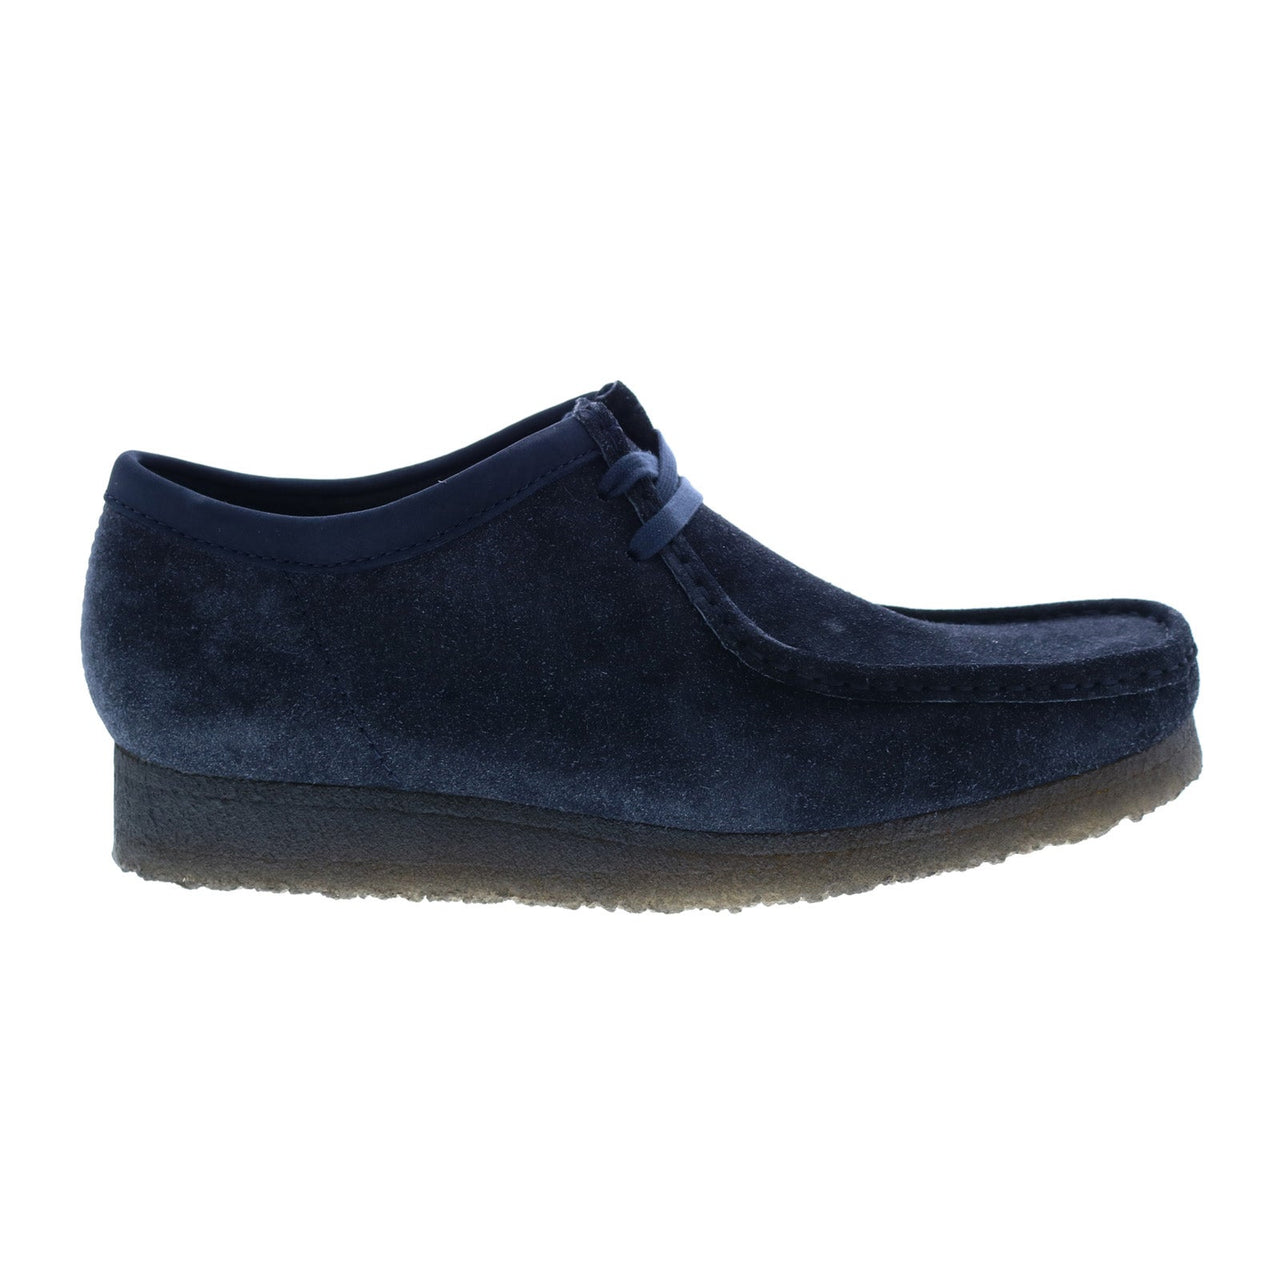 Blue suede Clarks Wallabee 26168854 men's oxfords and lace up casual shoes on white background